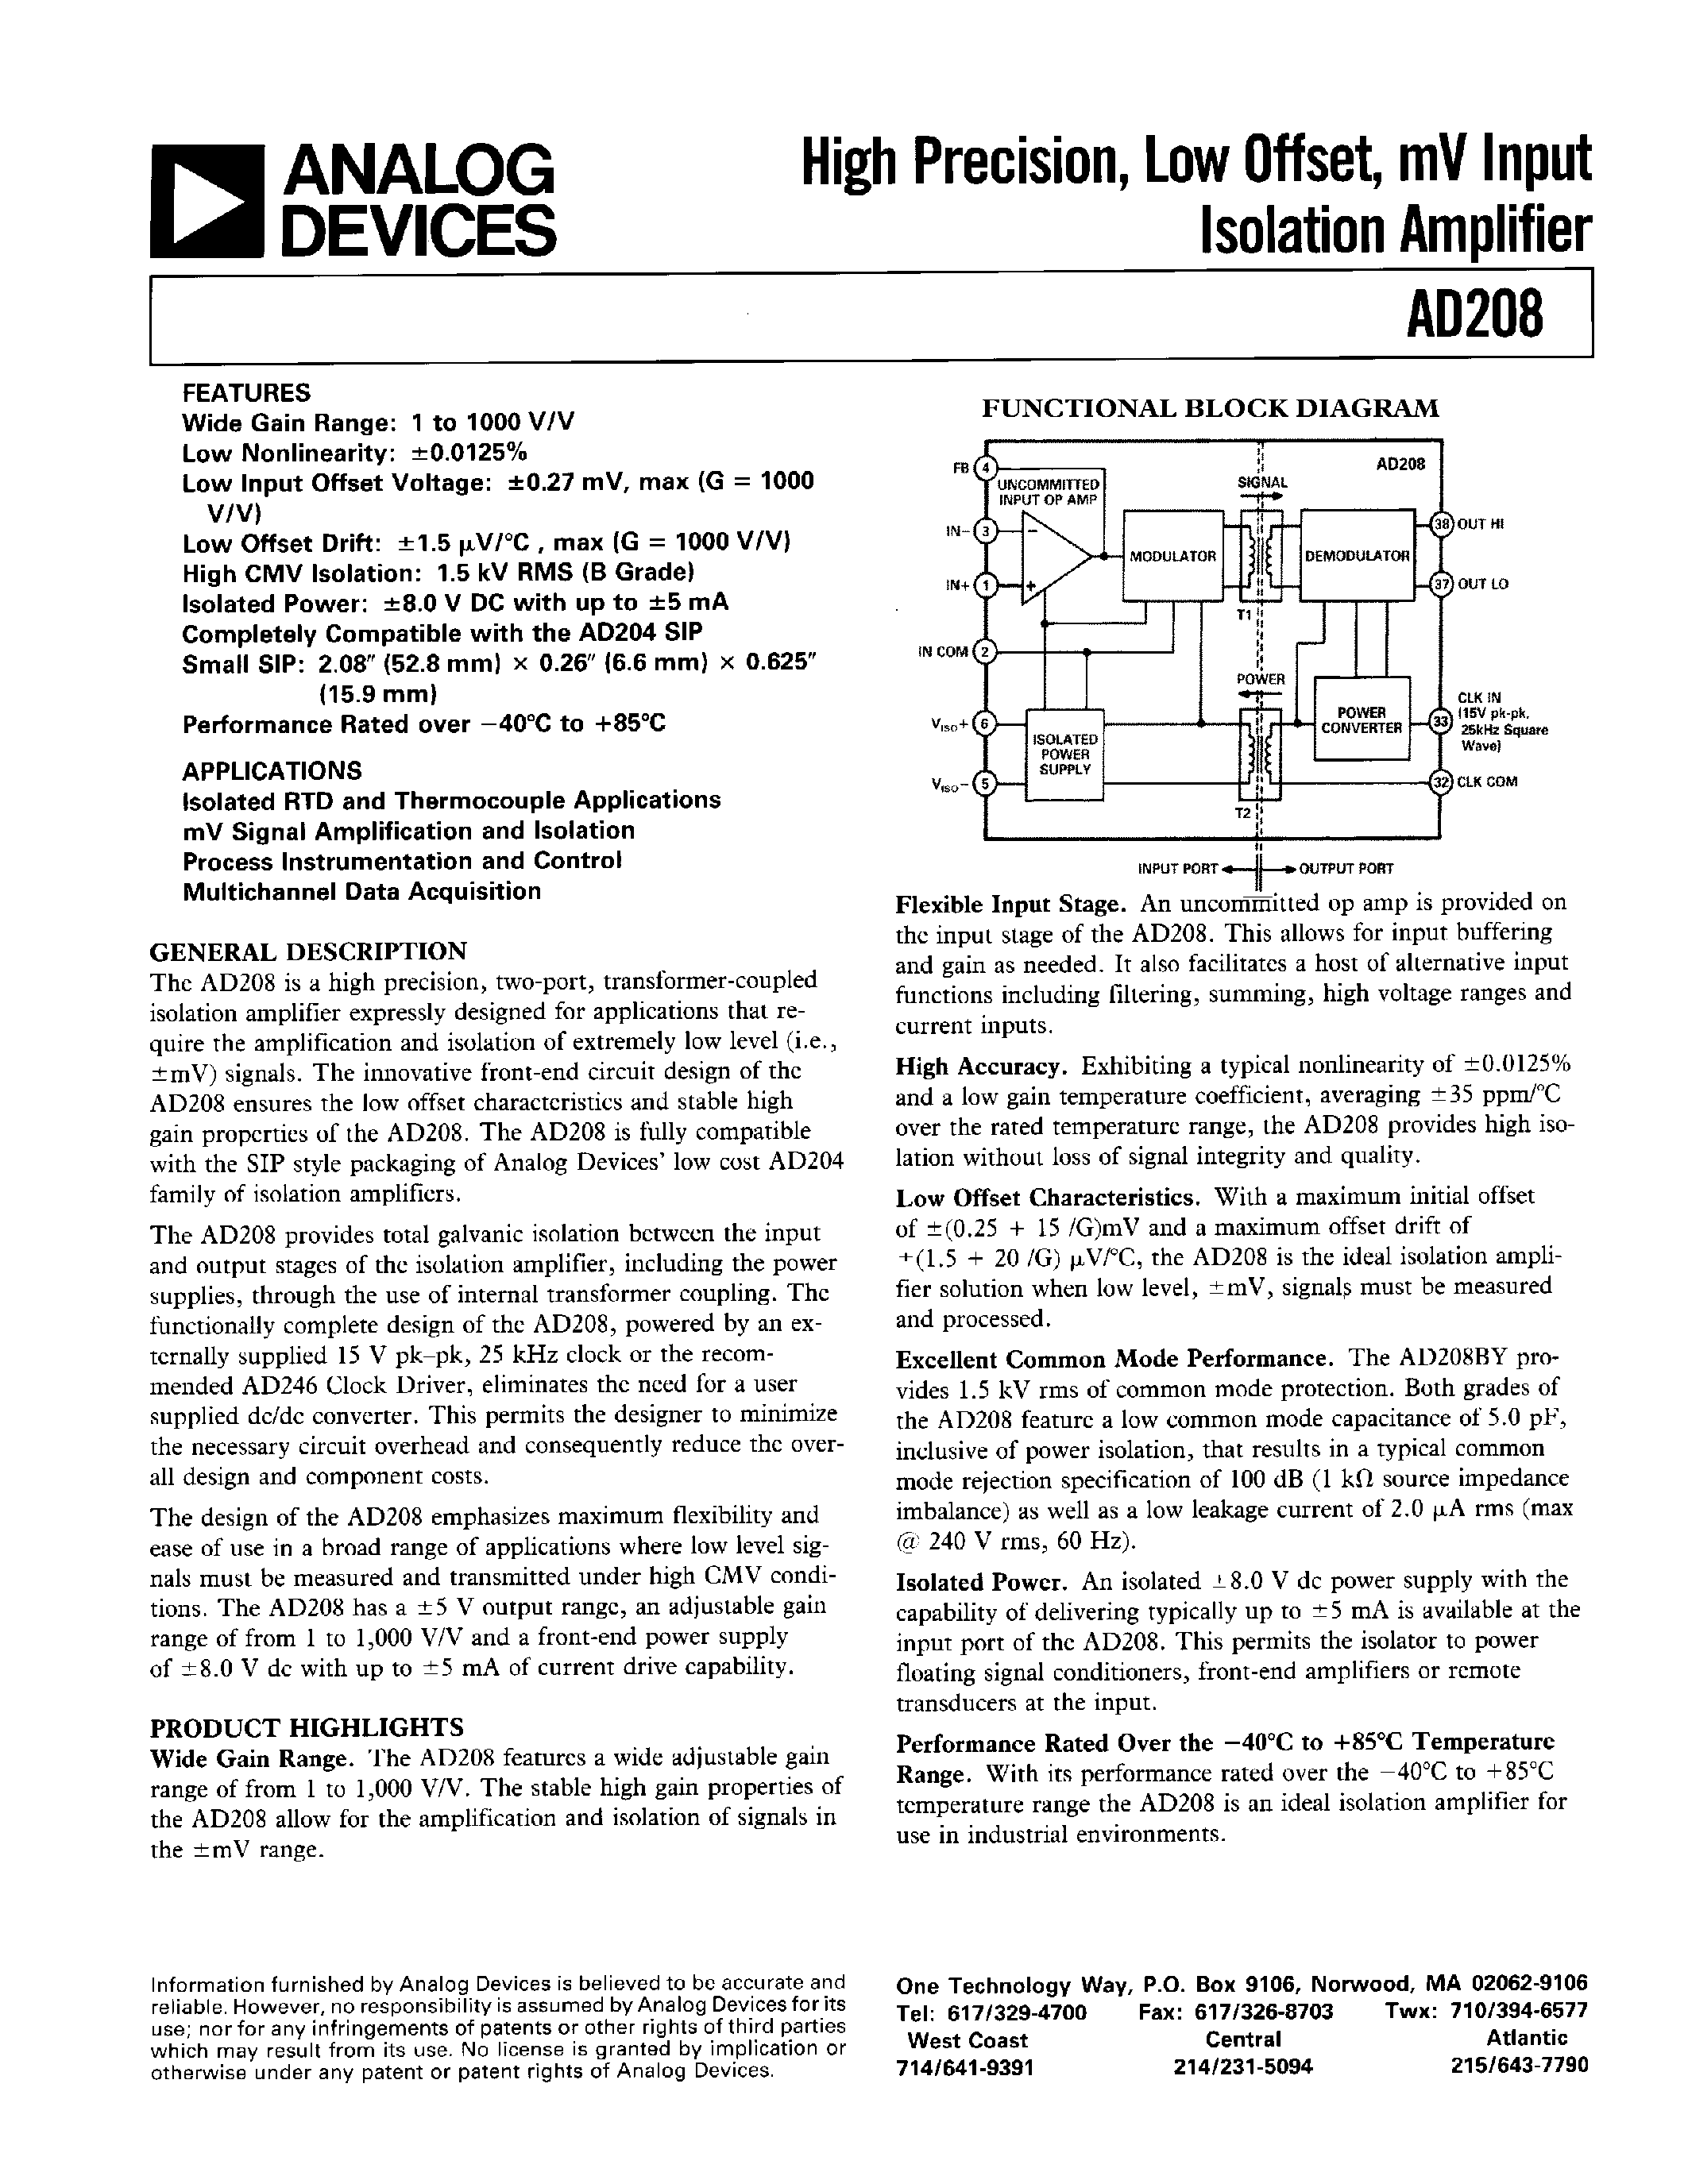 Datasheet AD208BY - High Precision/ Low Offset/ mV Input Isolation Amplifier page 1